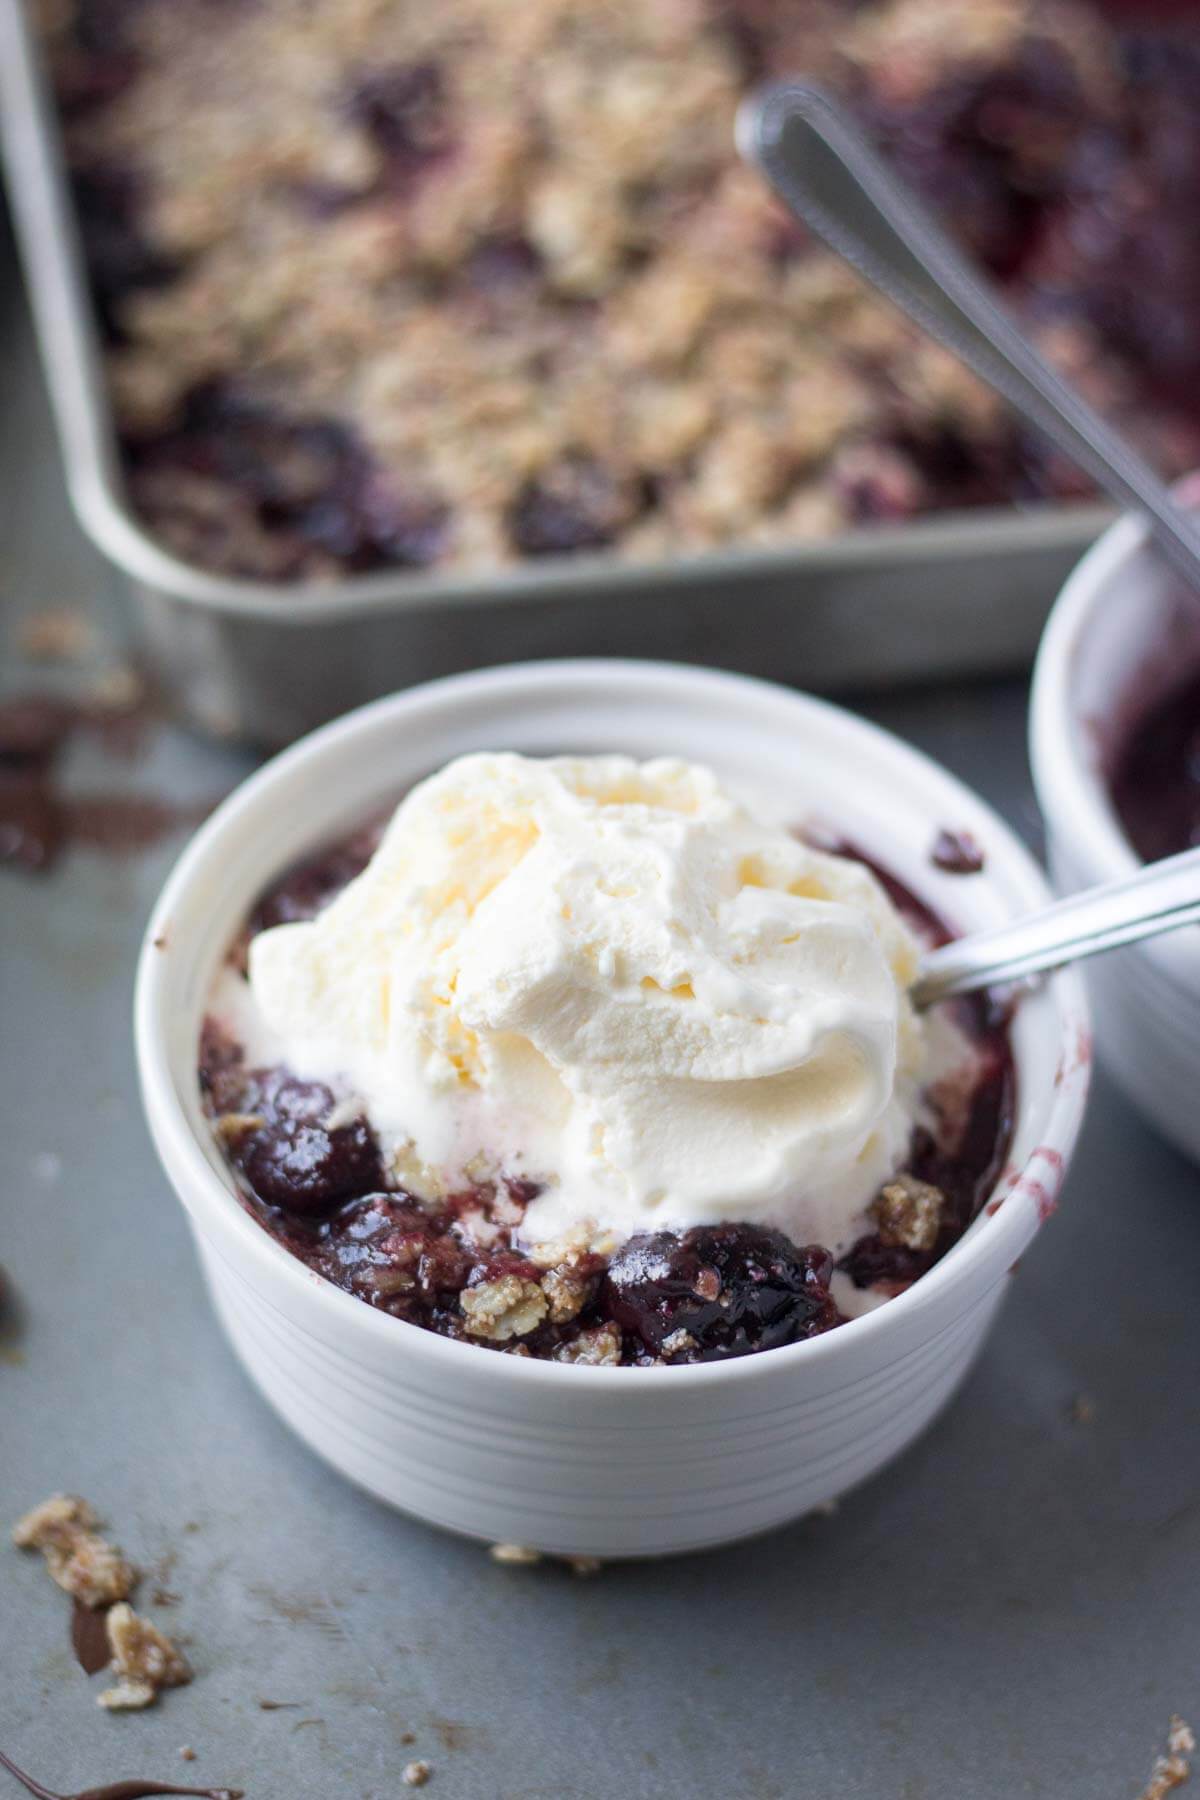 These easy cherry crisp recipe is made with frozen cherries and dark chocolate and topped with a gluten free oat crust. It's the perfect summer dessert recipe!